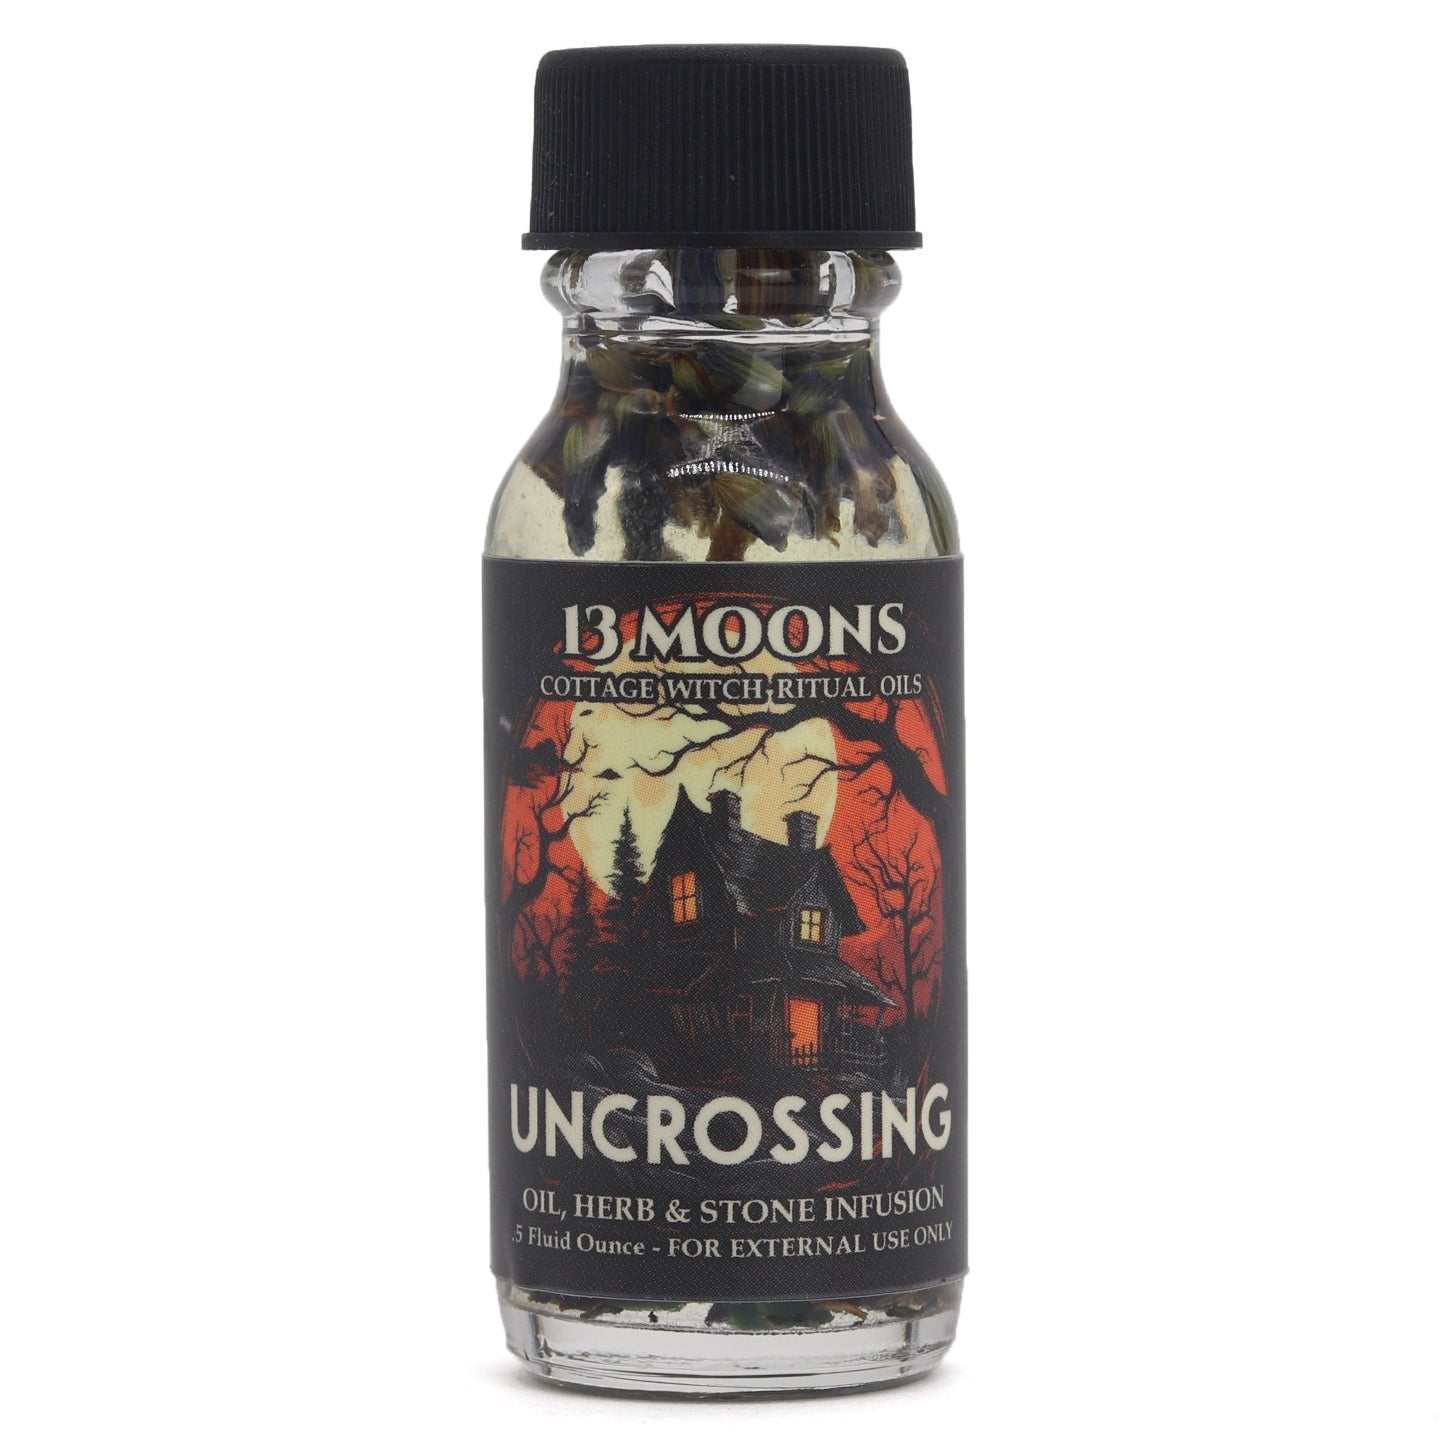 Uncrossing Ritual Oil by 13 Moons - 13 Moons